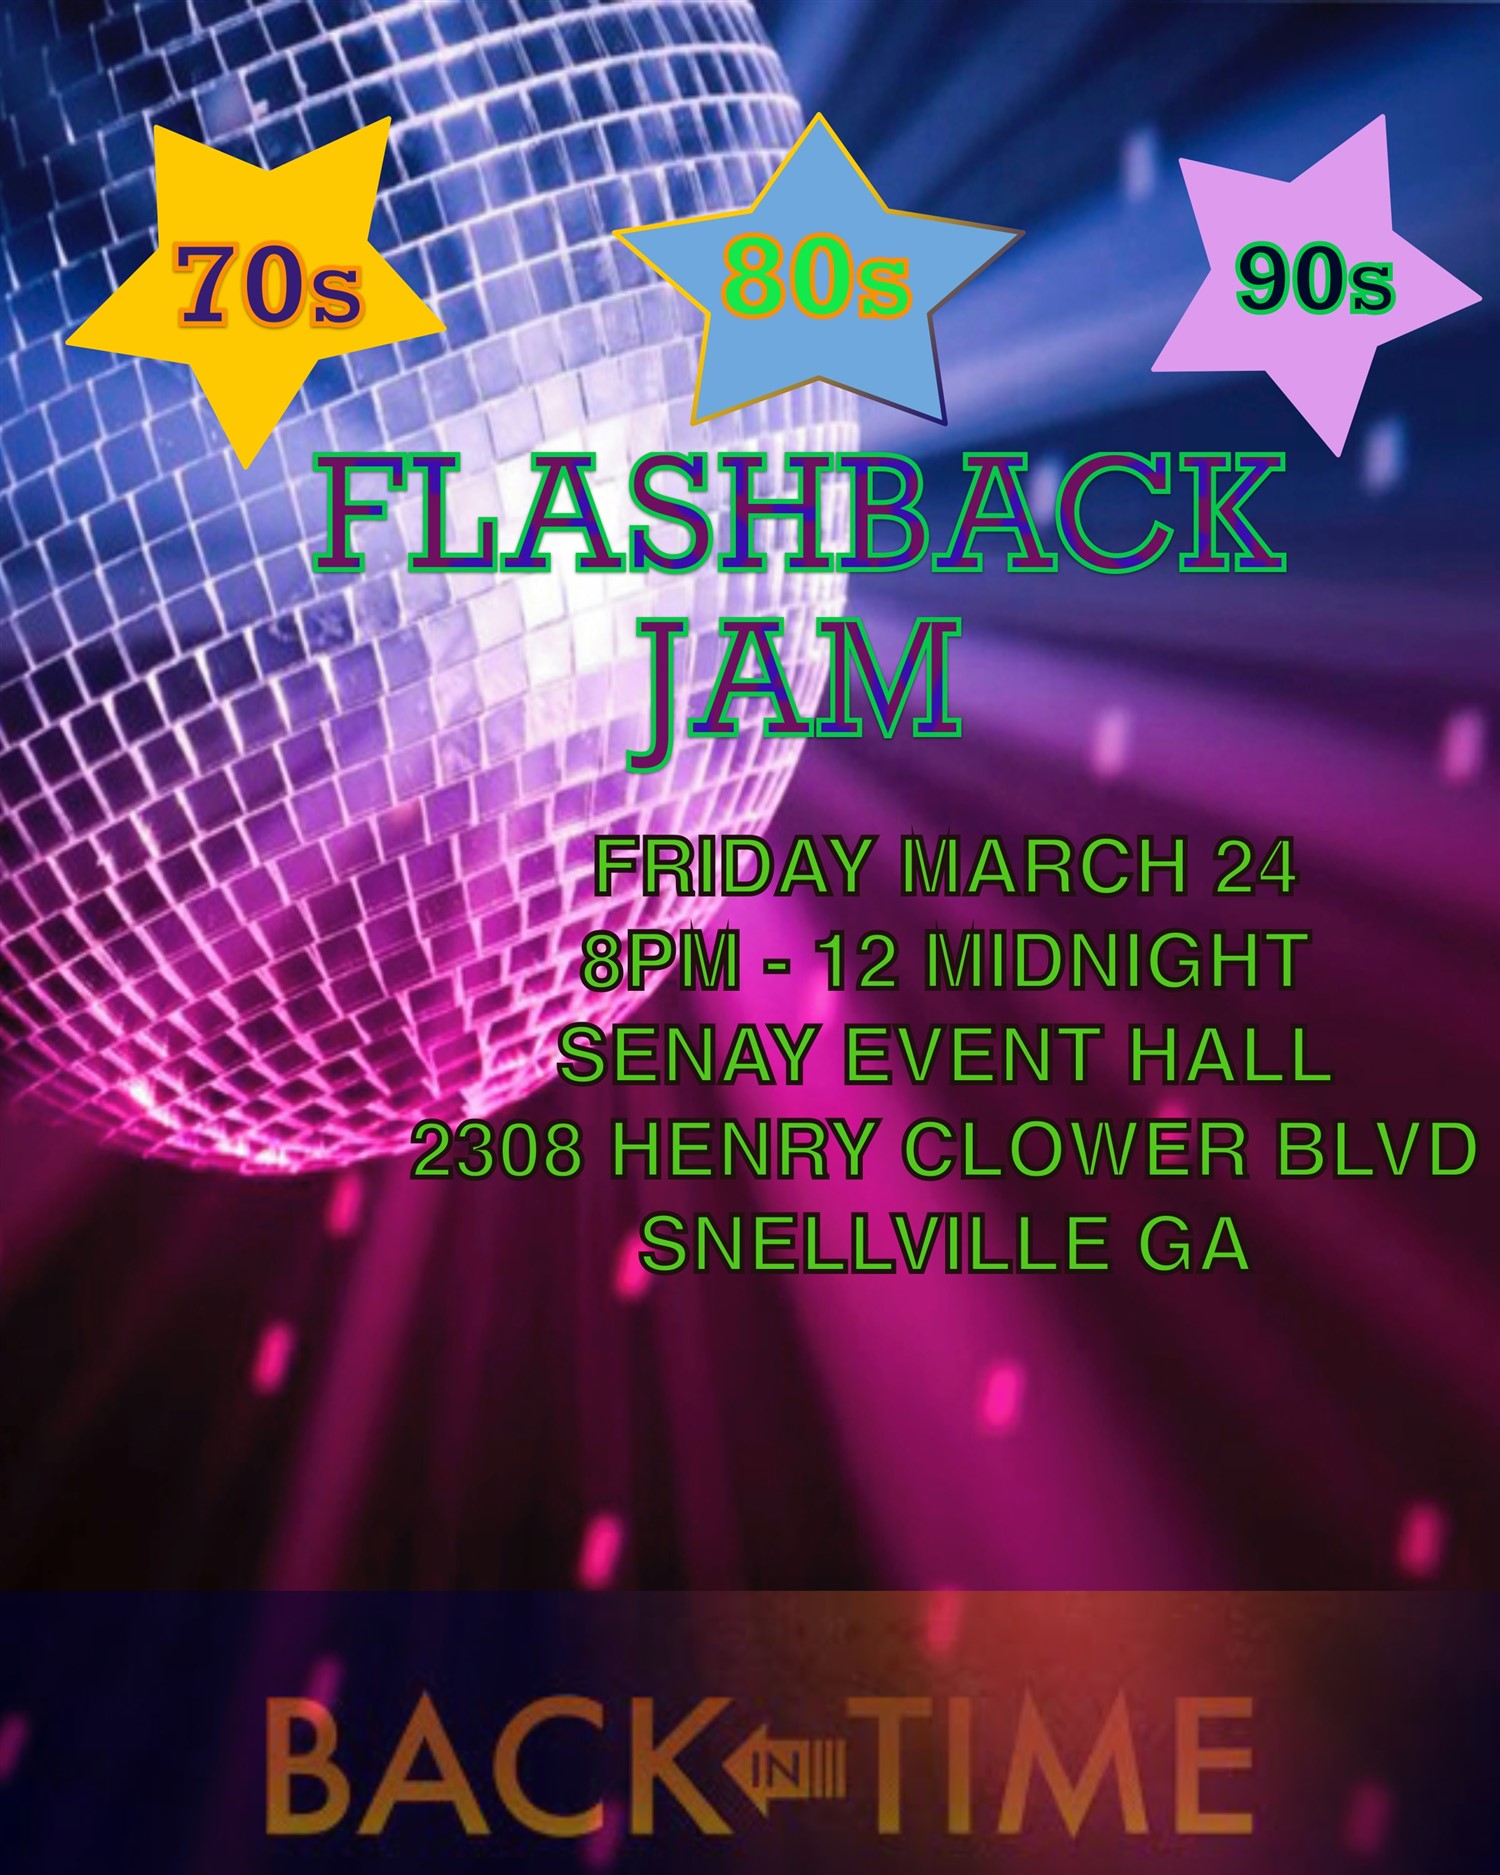 70s 80s 90s Flashback Party Bring the Funky Back on Mar 24, 20:00@SENAY EVENT HALL - Buy tickets and Get information on DKM MEDIA & ASSOCIATES 